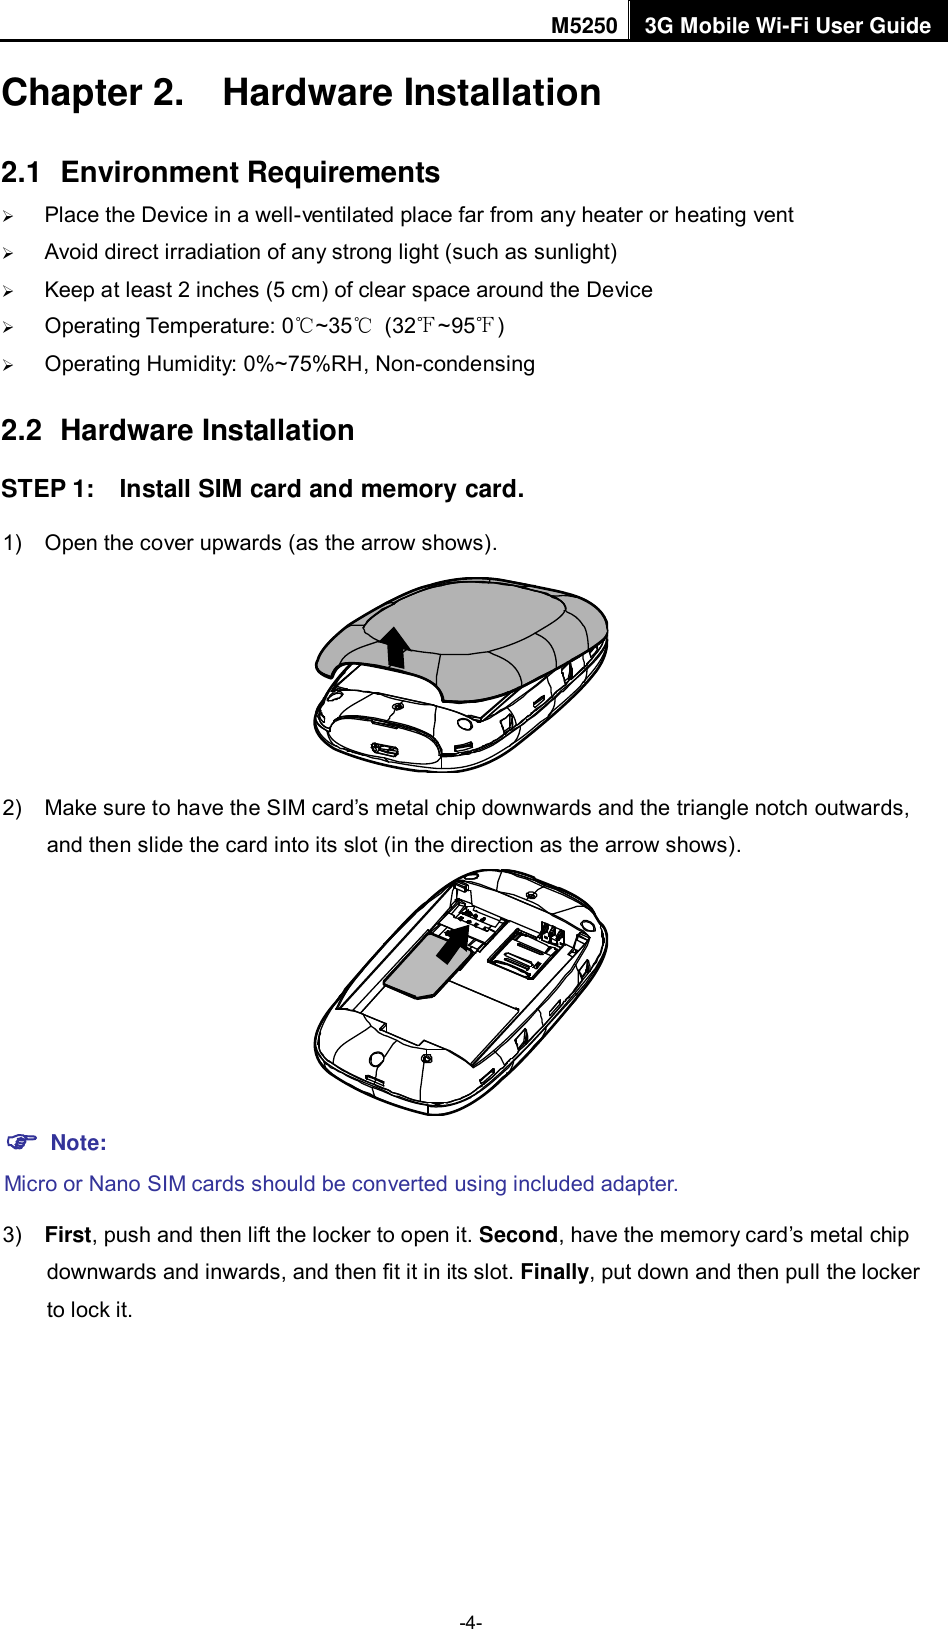 M5250 3G Mobile Wi-Fi User Guide  -4- Chapter 2.  Hardware Installation 2.1  Environment Requirements  Place the Device in a well-ventilated place far from any heater or heating vent    Avoid direct irradiation of any strong light (such as sunlight)  Keep at least 2 inches (5 cm) of clear space around the Device  Operating Temperature: 0℃~35℃  (32℉~95℉)  Operating Humidity: 0%~75%RH, Non-condensing 2.2  Hardware Installation STEP 1:    Install SIM card and memory card. 1)  Open the cover upwards (as the arrow shows).  2)  Make sure to have the SIM card‟s metal chip downwards and the triangle notch outwards, and then slide the card into its slot (in the direction as the arrow shows).   Note: Micro or Nano SIM cards should be converted using included adapter. 3) First, push and then lift the locker to open it. Second, have the memory card‟s metal chip downwards and inwards, and then fit it in its slot. Finally, put down and then pull the locker to lock it. 